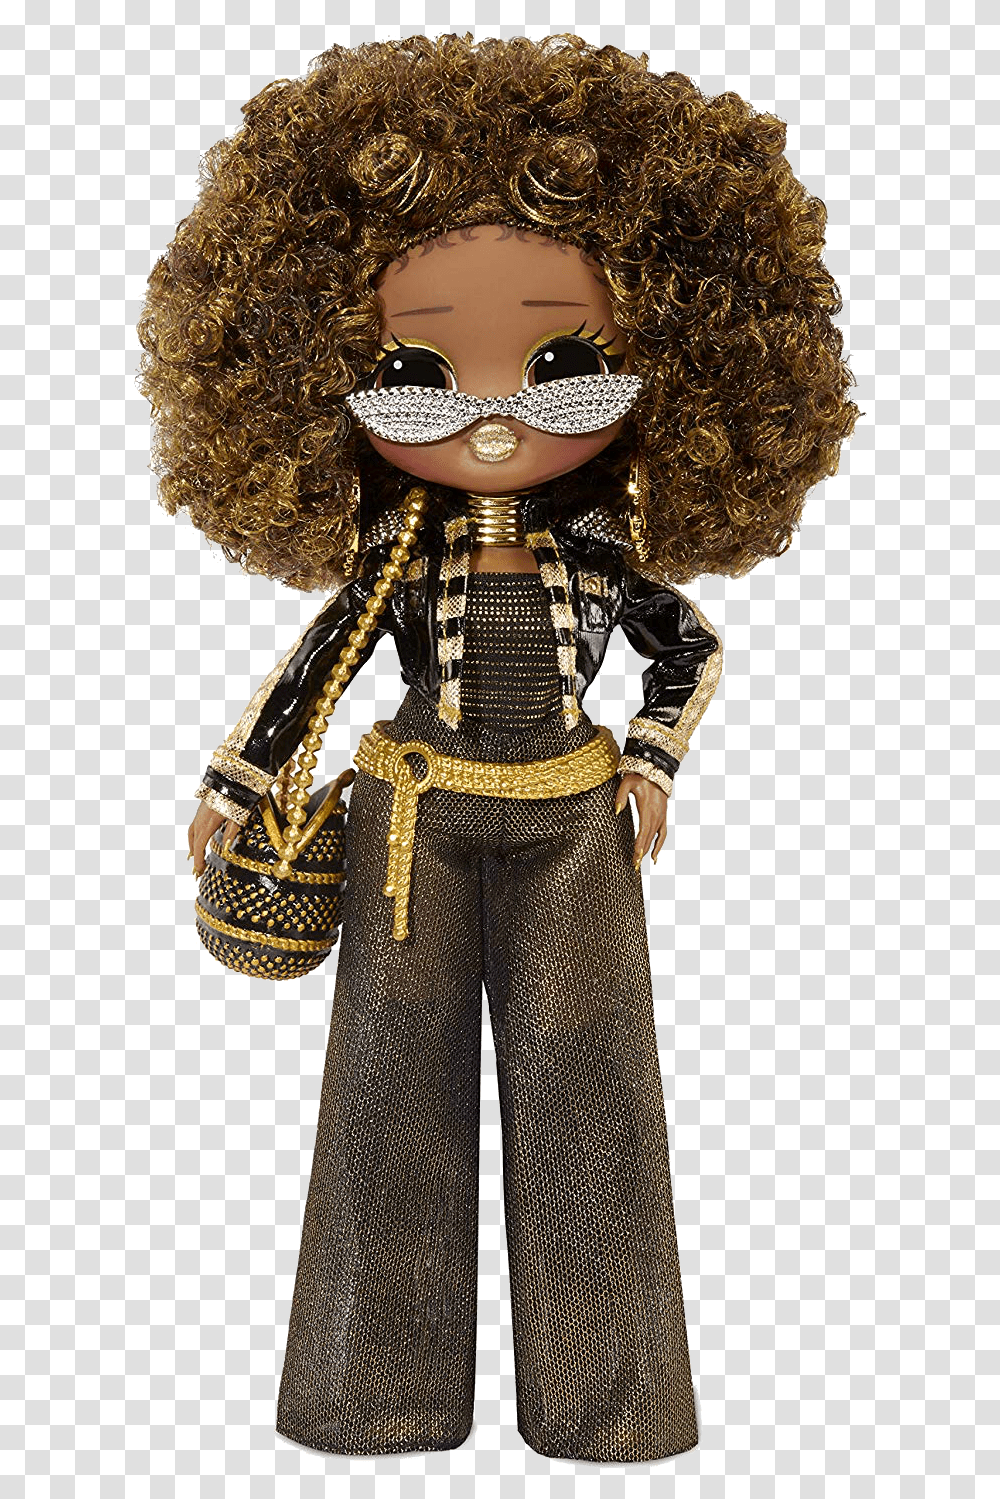 L O L Surprise Doll Lol Omg Dolls, Hair, Toy, Sunglasses, Accessories Transparent Png